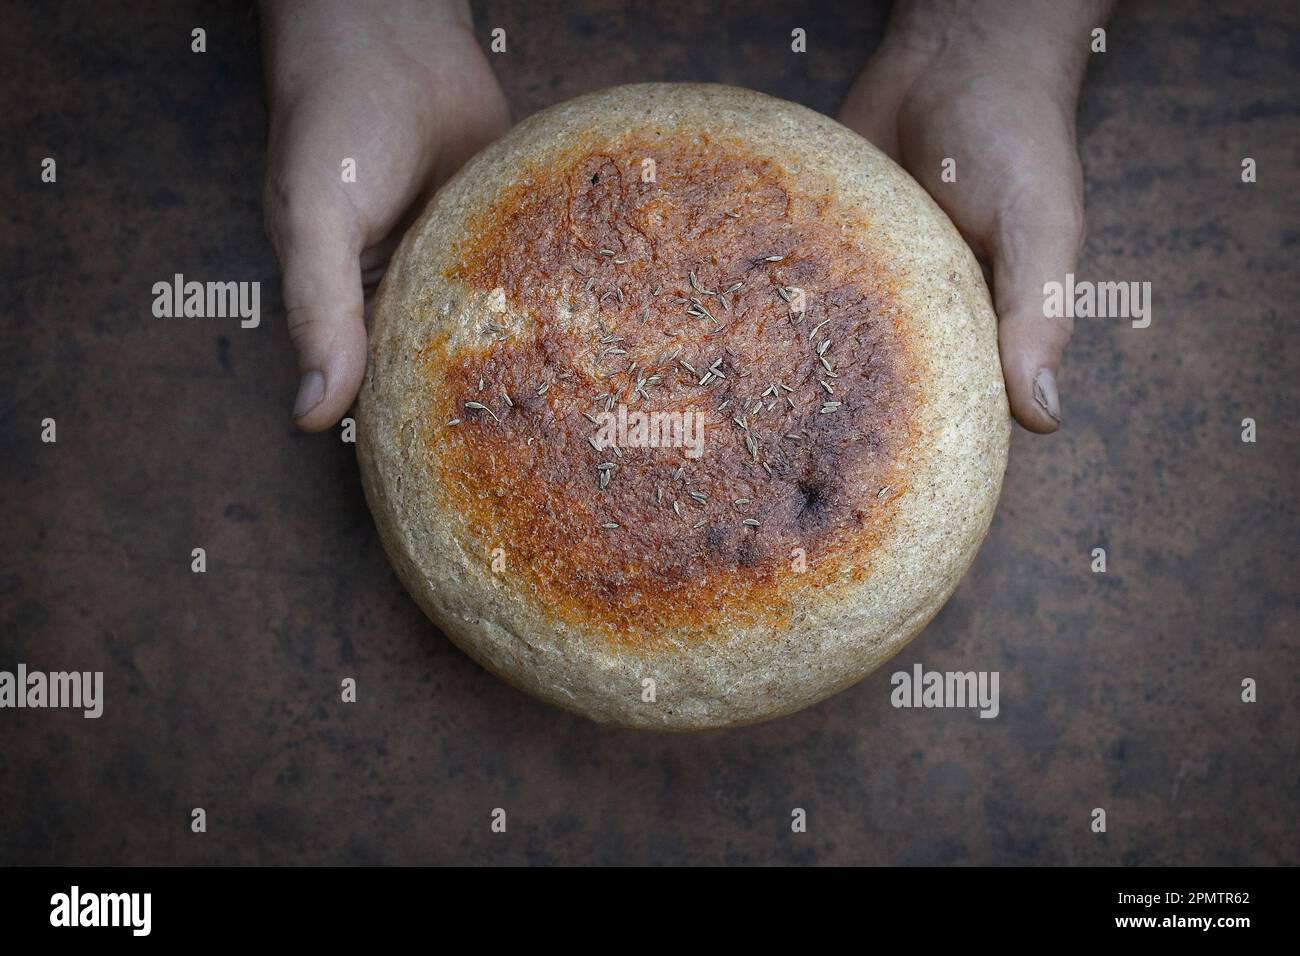 Homemade crusty loave of bread on wooden background. Baker holding fresh bread in the hands. Still life concept. Dark mood.view from above Stock Photo